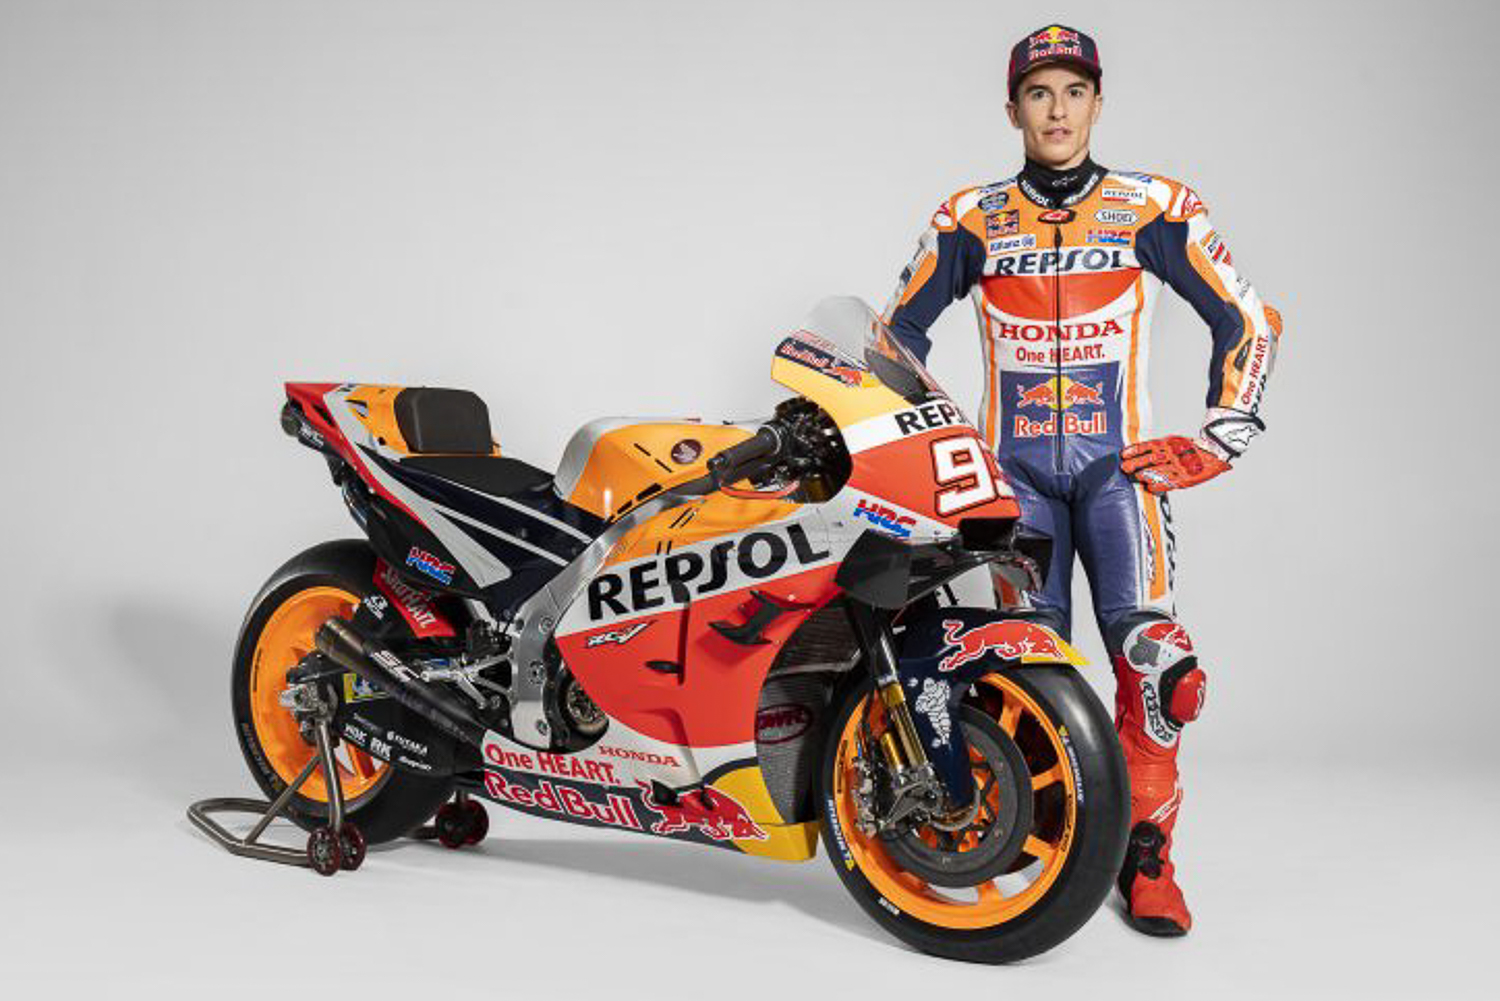 TopGear | Marc Marquez rides again for the first time since July 2020